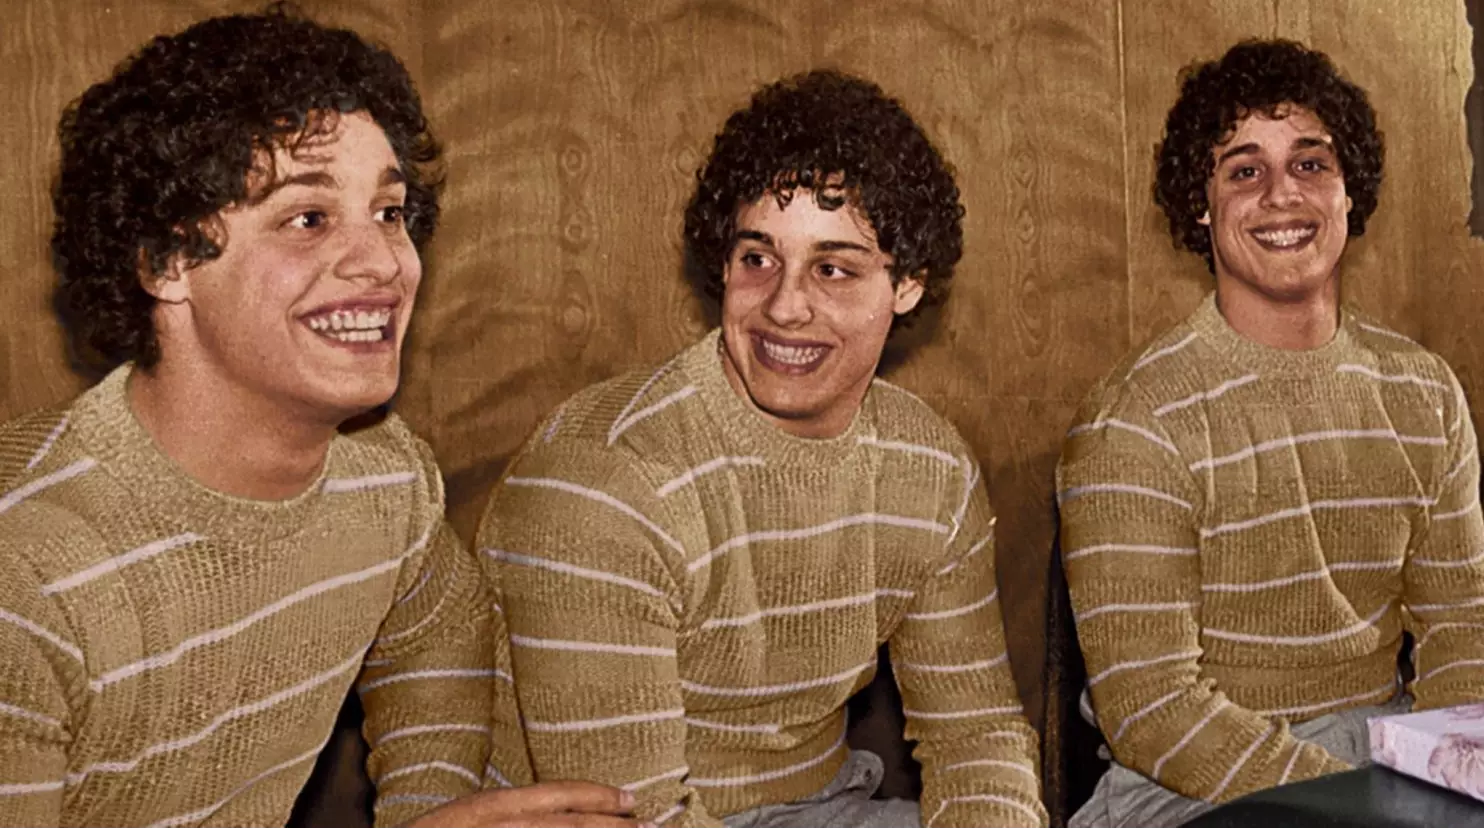 Bizarre Story Of Triplets Separated At Birth For A Scientific Experiment